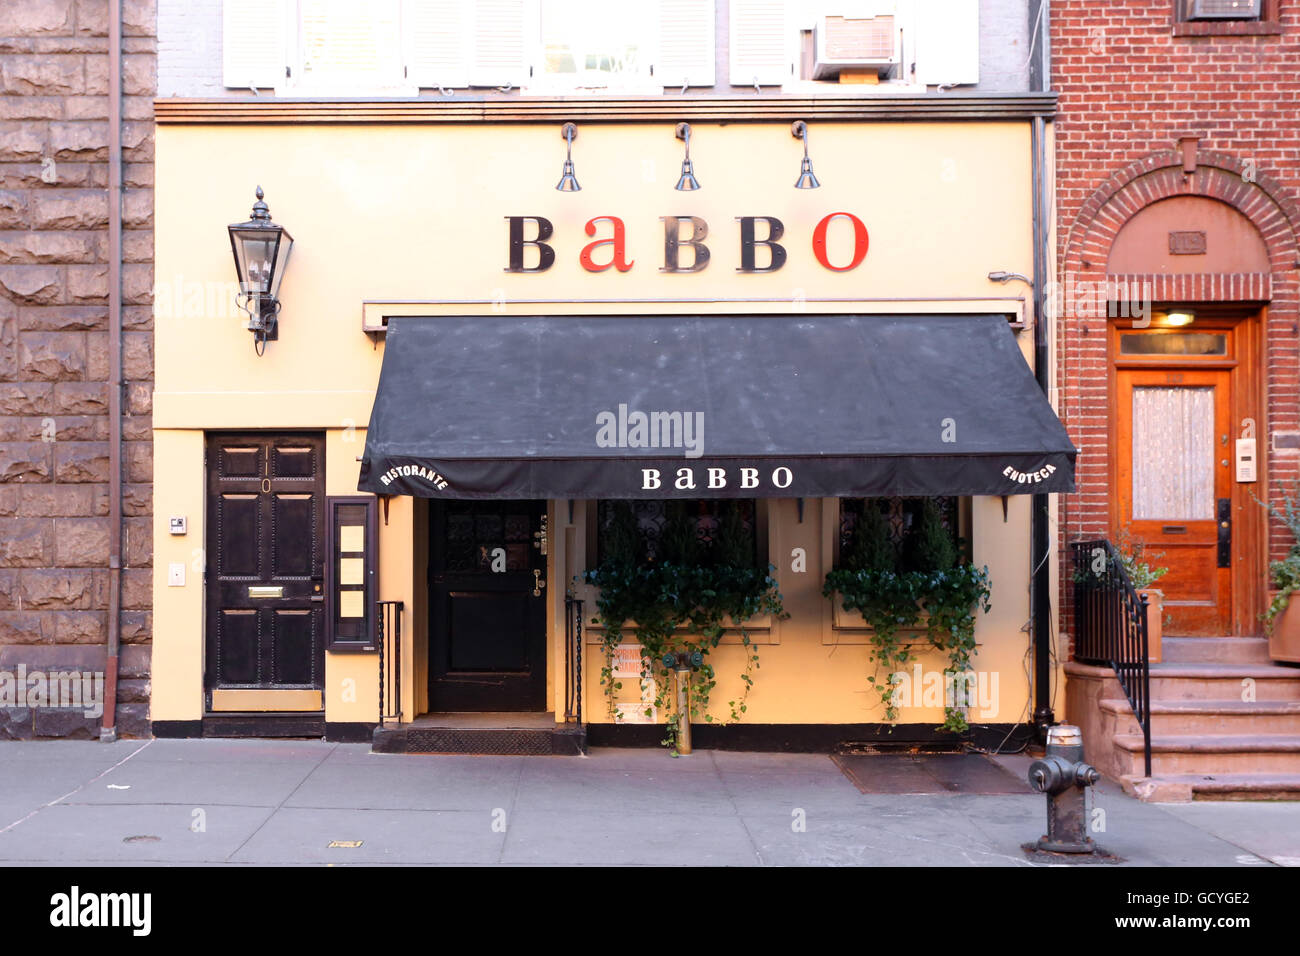 Babbo, 110 Waverly Pl, New York, NY. exterior storefront of an Italian restaurant in the Greenwich Village neighborhood of Manhattan. Stock Photo